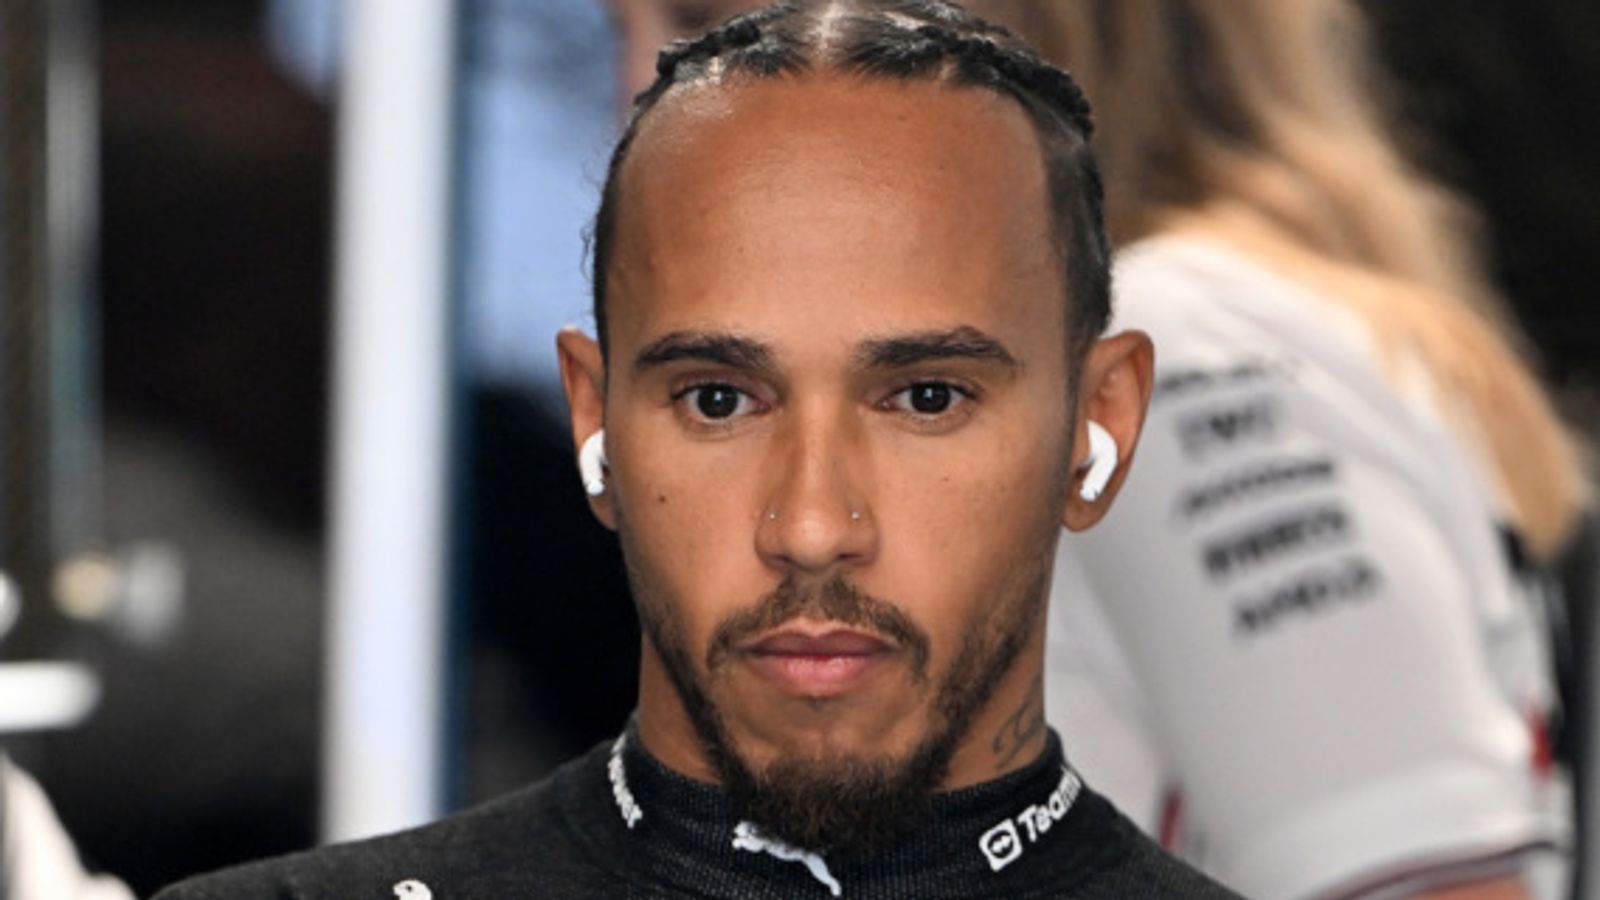 Lewis Hamilton: Mercedes driver bemoans ‘one of the worst races’ of his career at Canadian Grand Prix